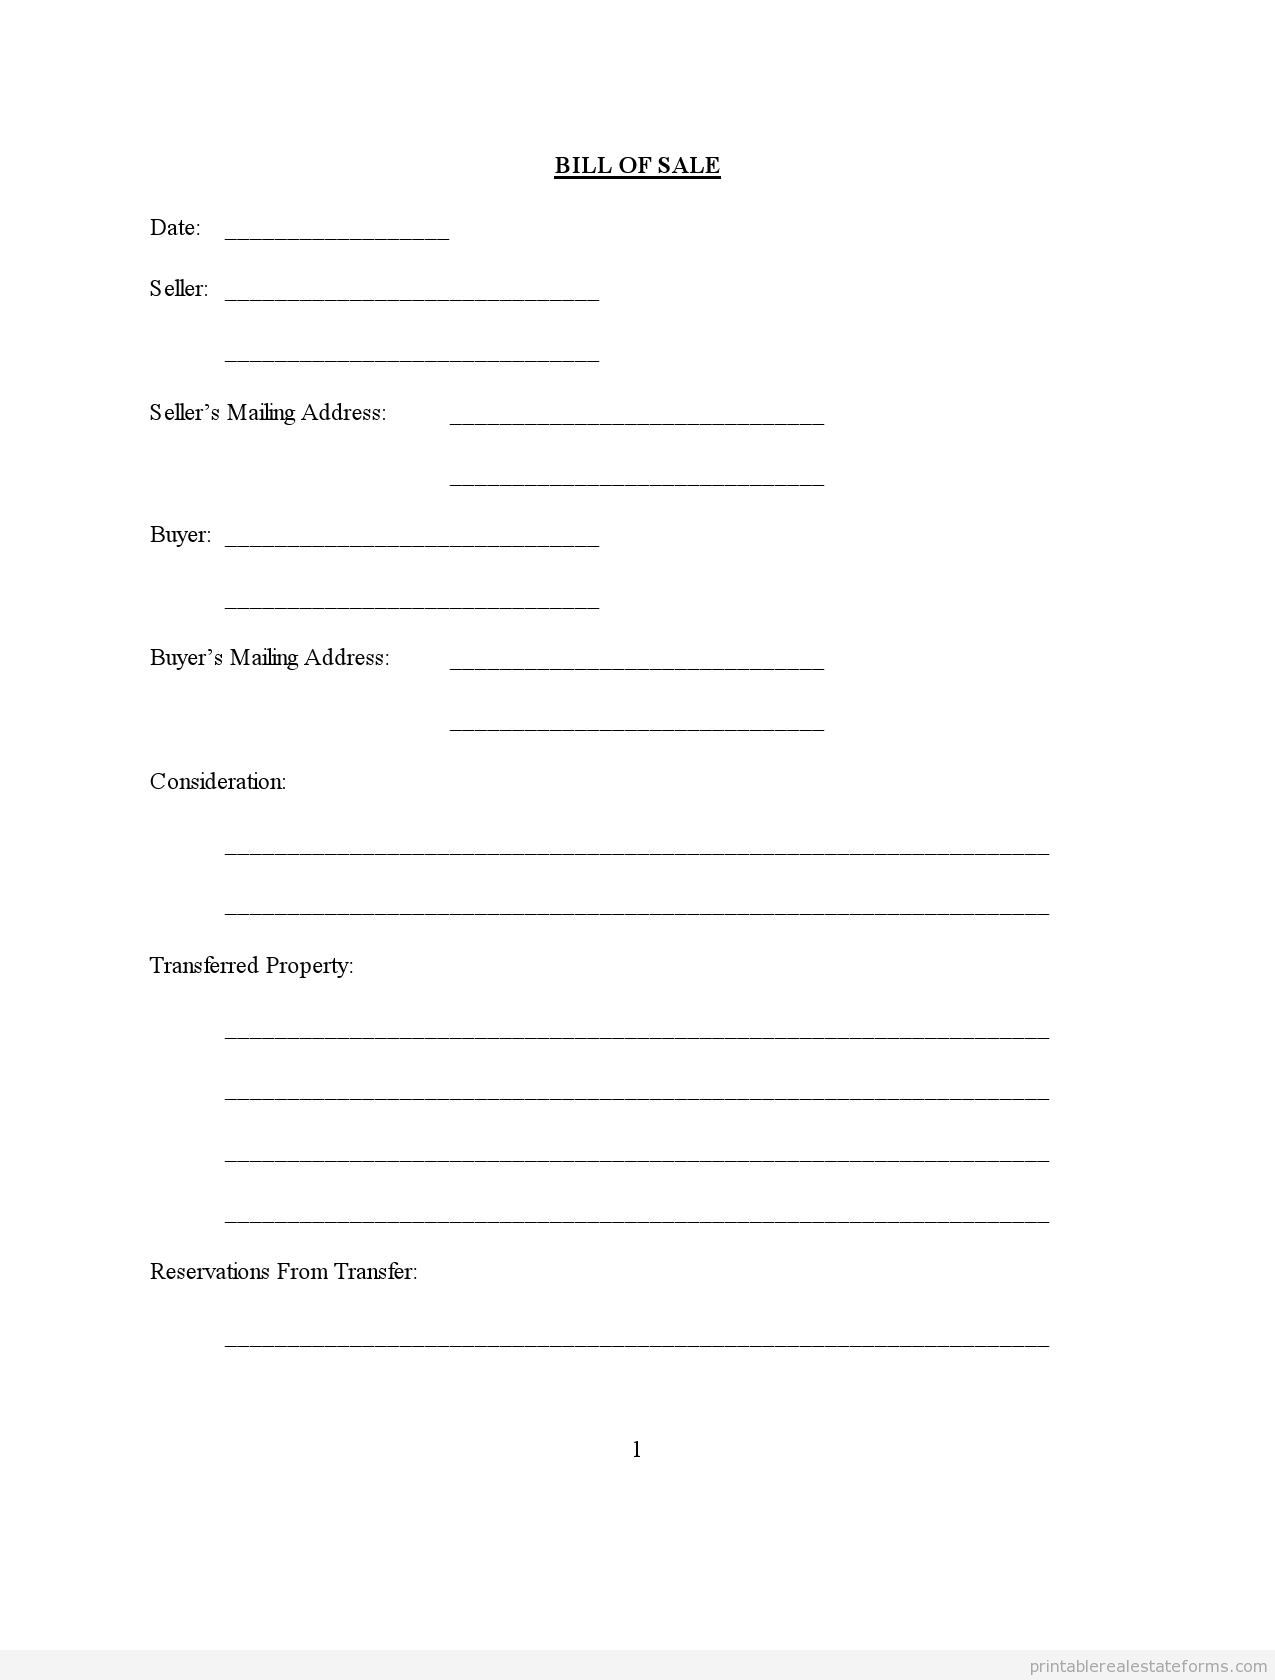 free-printable-basic-bill-of-sale-mazmoves